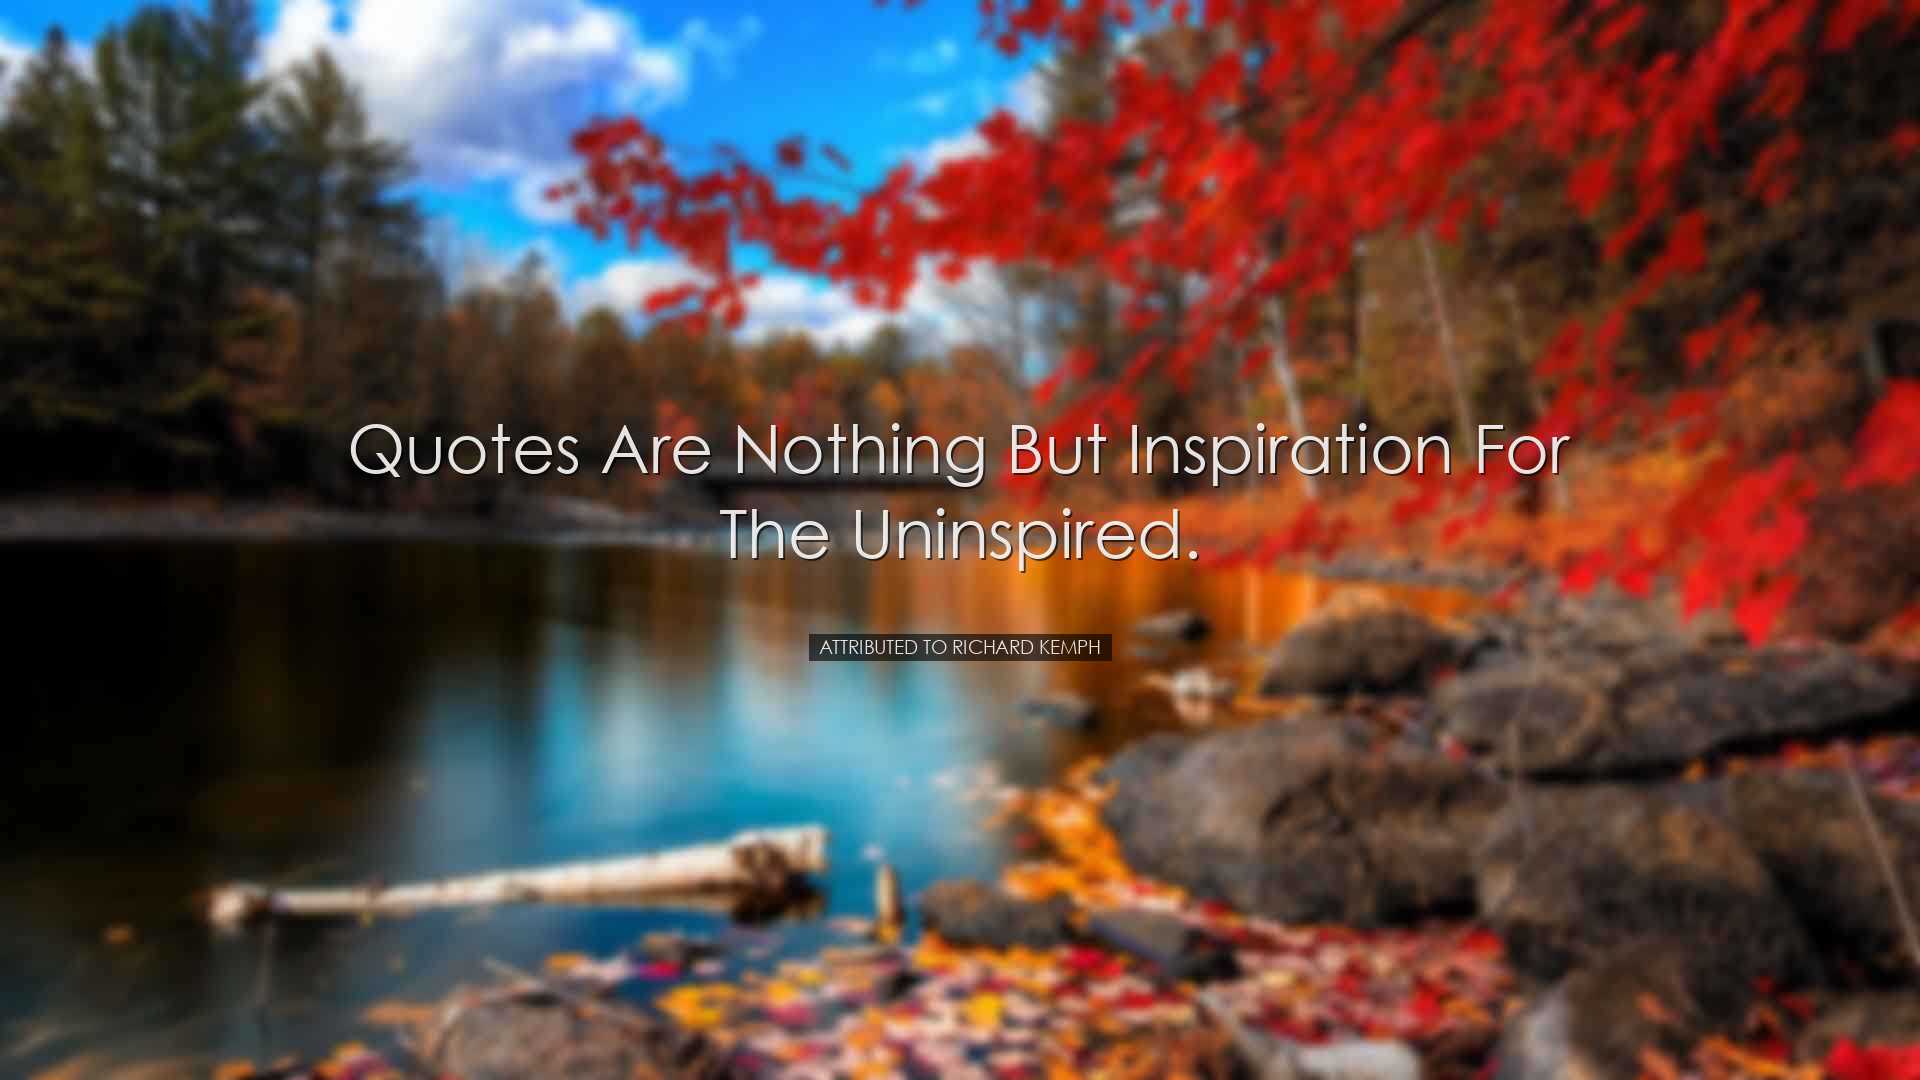 Quotes are nothing but inspiration for the uninspired. - Attribute